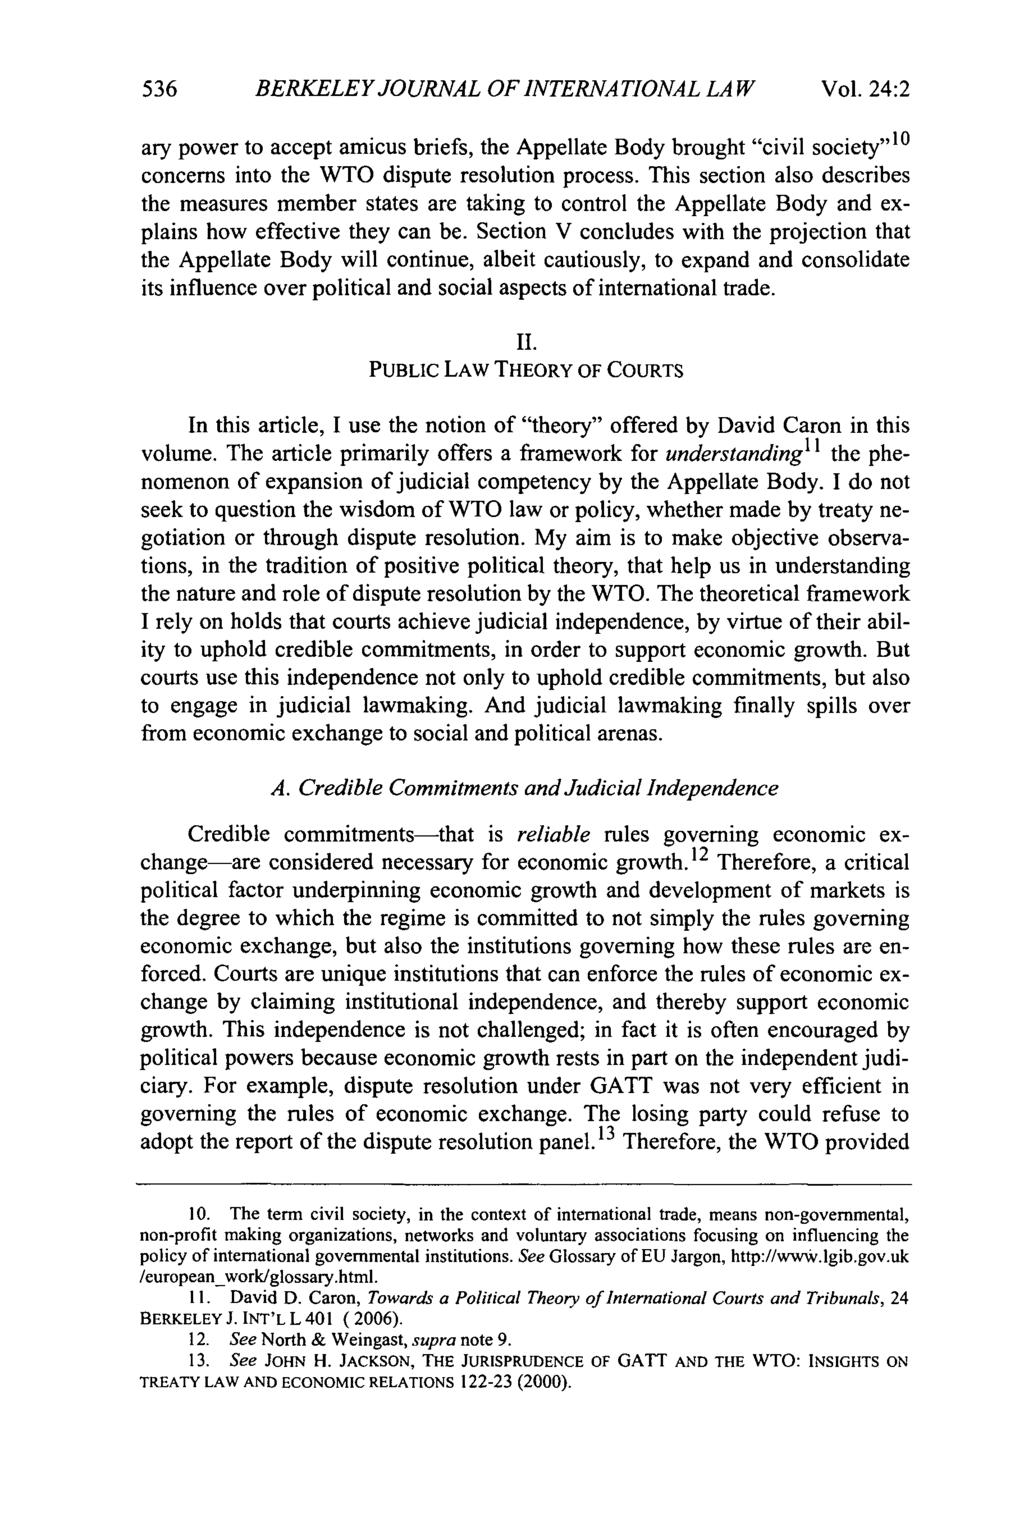 BERKELEY JOURNAL OF INTERNATIONAL LAW Vol. 24:2 ary power to accept amicus briefs, the Appellate Body brought "civil society" ' 10 concerns into the WTO dispute resolution process.